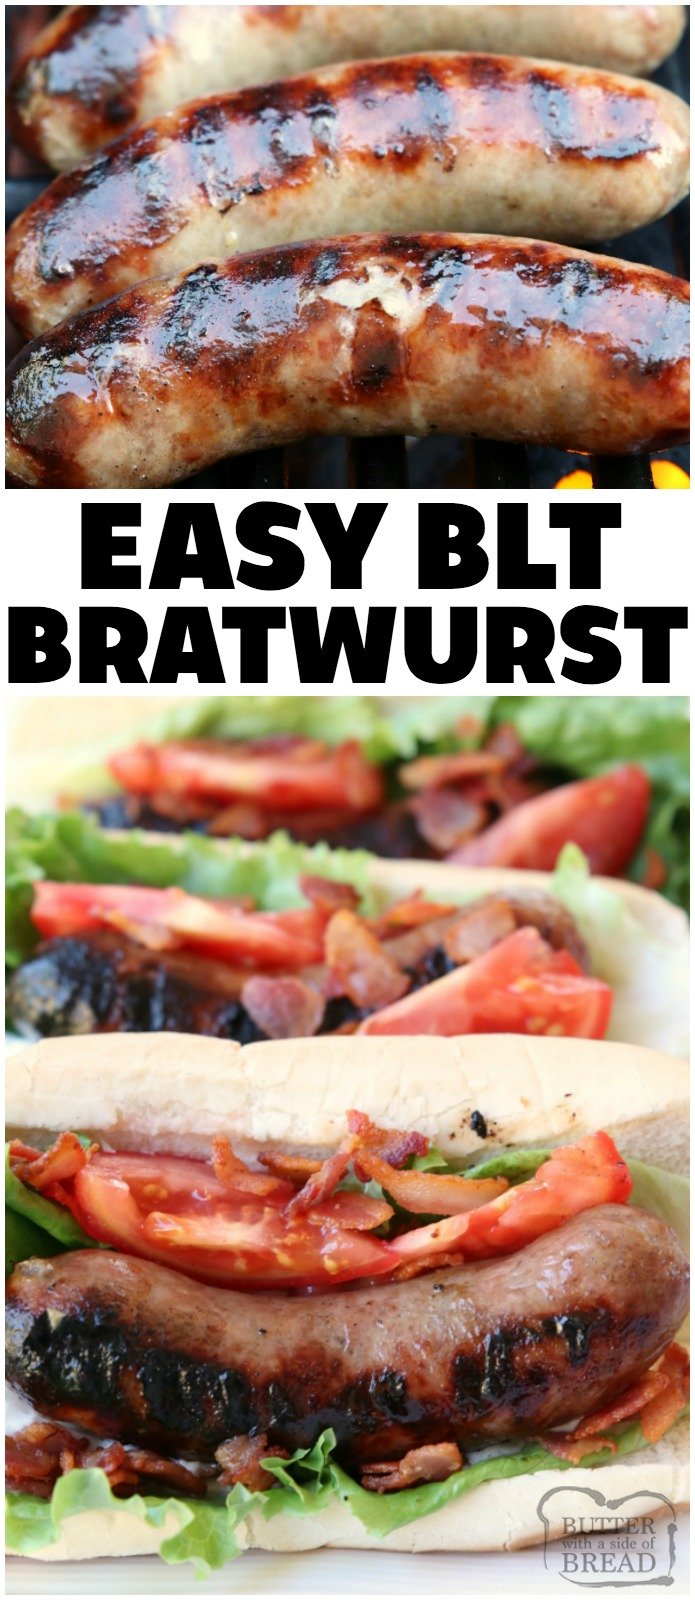 BLT Bratwurst recipe made easy with grilled bratwurst sausages topped with leaf lettuce, fresh tomatoes and bacon. Perfect bratwurst recipe for when you want a delicious, flavorful dinner on the table fast!  #bratwurst #BLT #sausage #grilling #grill #meat #dinner #BBQ #recipe from Butter With A Side of Bread